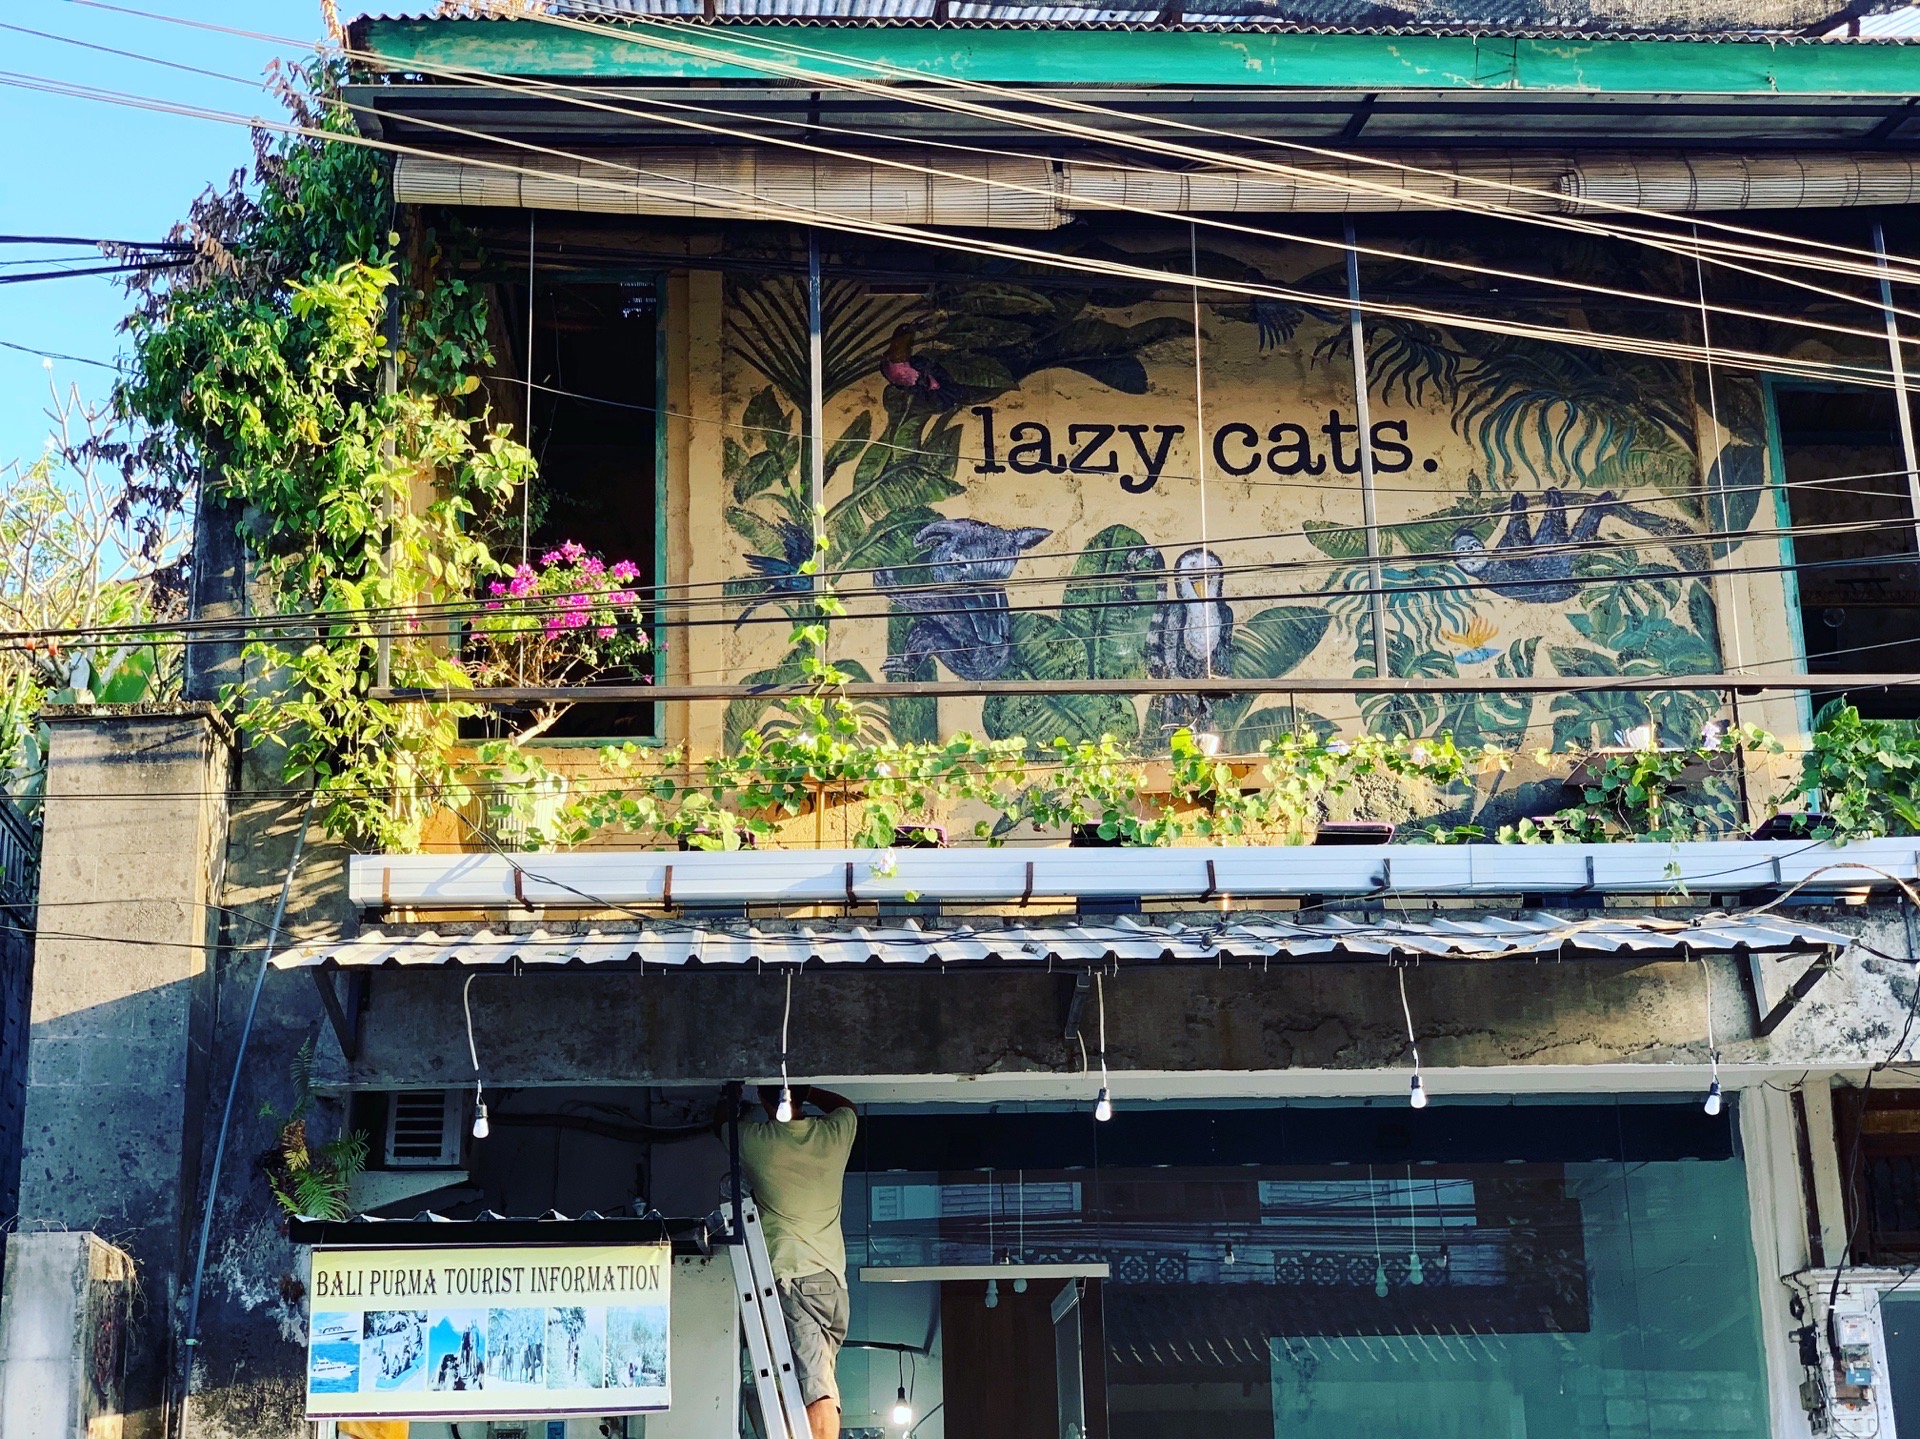 Lazy Cats Cafe restaurants, addresses, phone numbers, photos, real user  reviews, Jl. Raya Ubud no. 11 | End of Mainroad Ubud, Direction to Museo  Blanco, Ubud 80571, Indonesia, Bali restaurant recommendations - Trip.com